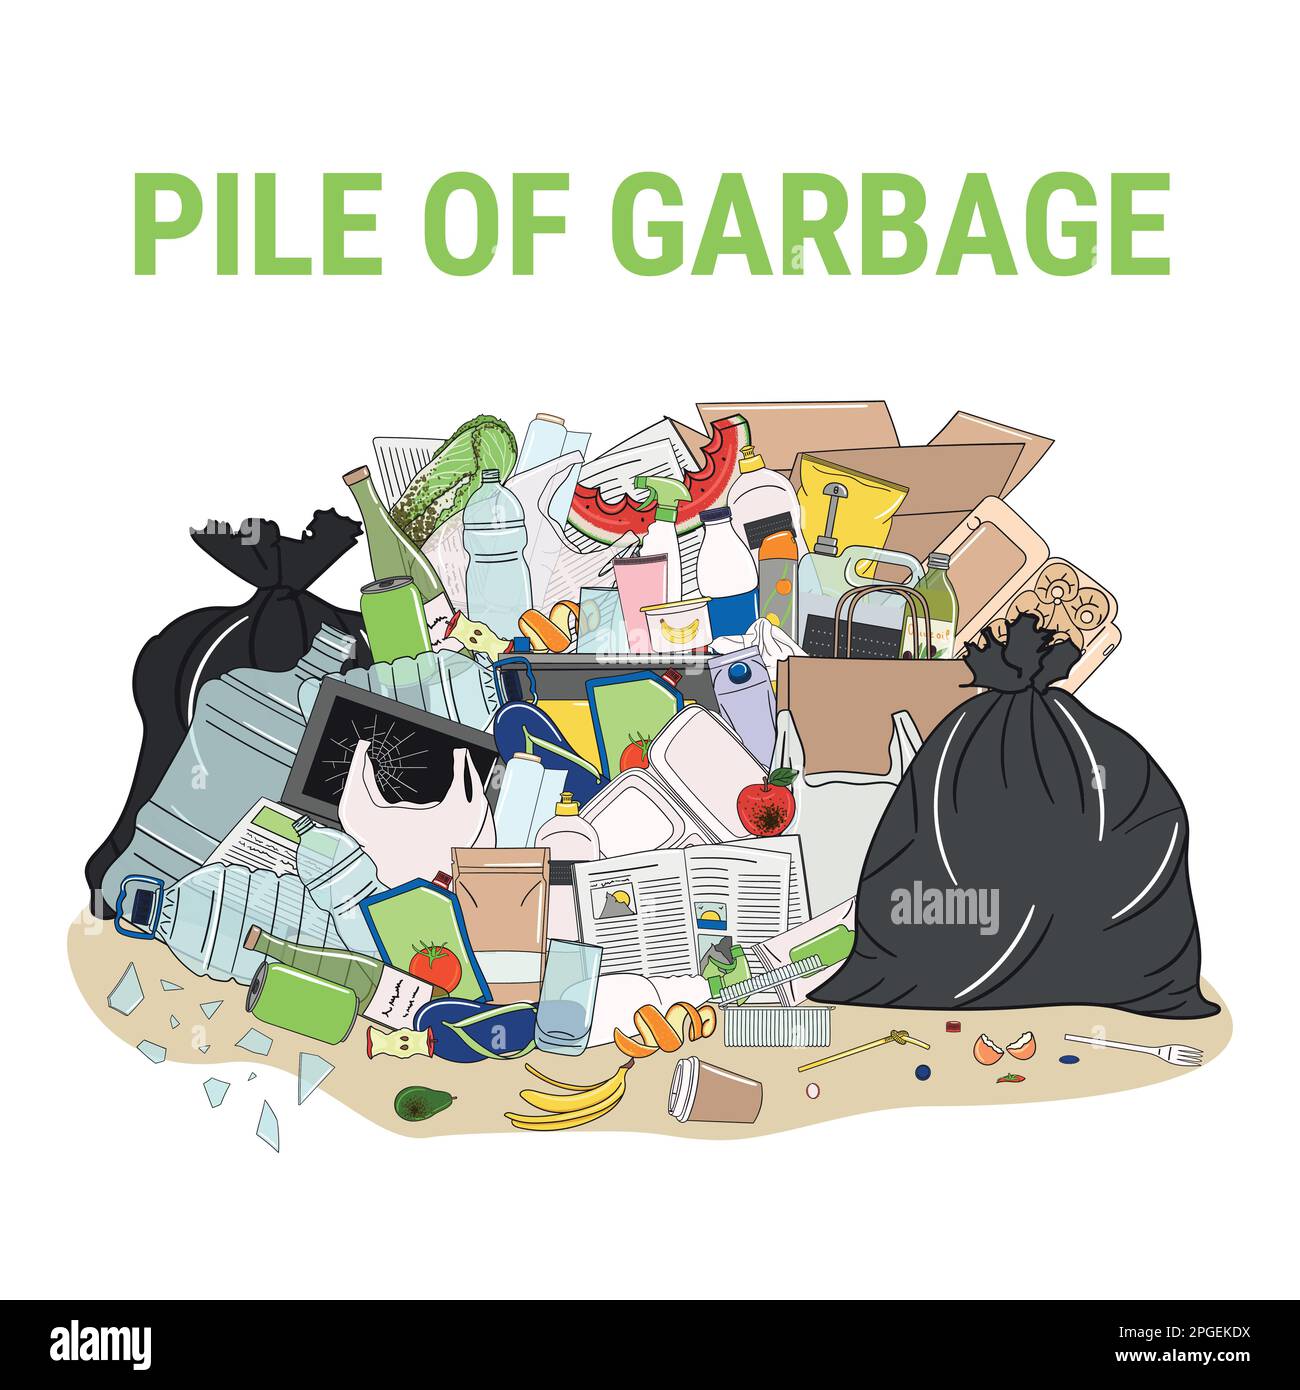 Pile of garbage and overflowing rubbish, food, metal, plastic, paper, glass, mixed trash. Waste management. Garbage pollution. Hand drawn vector illus Stock Vector